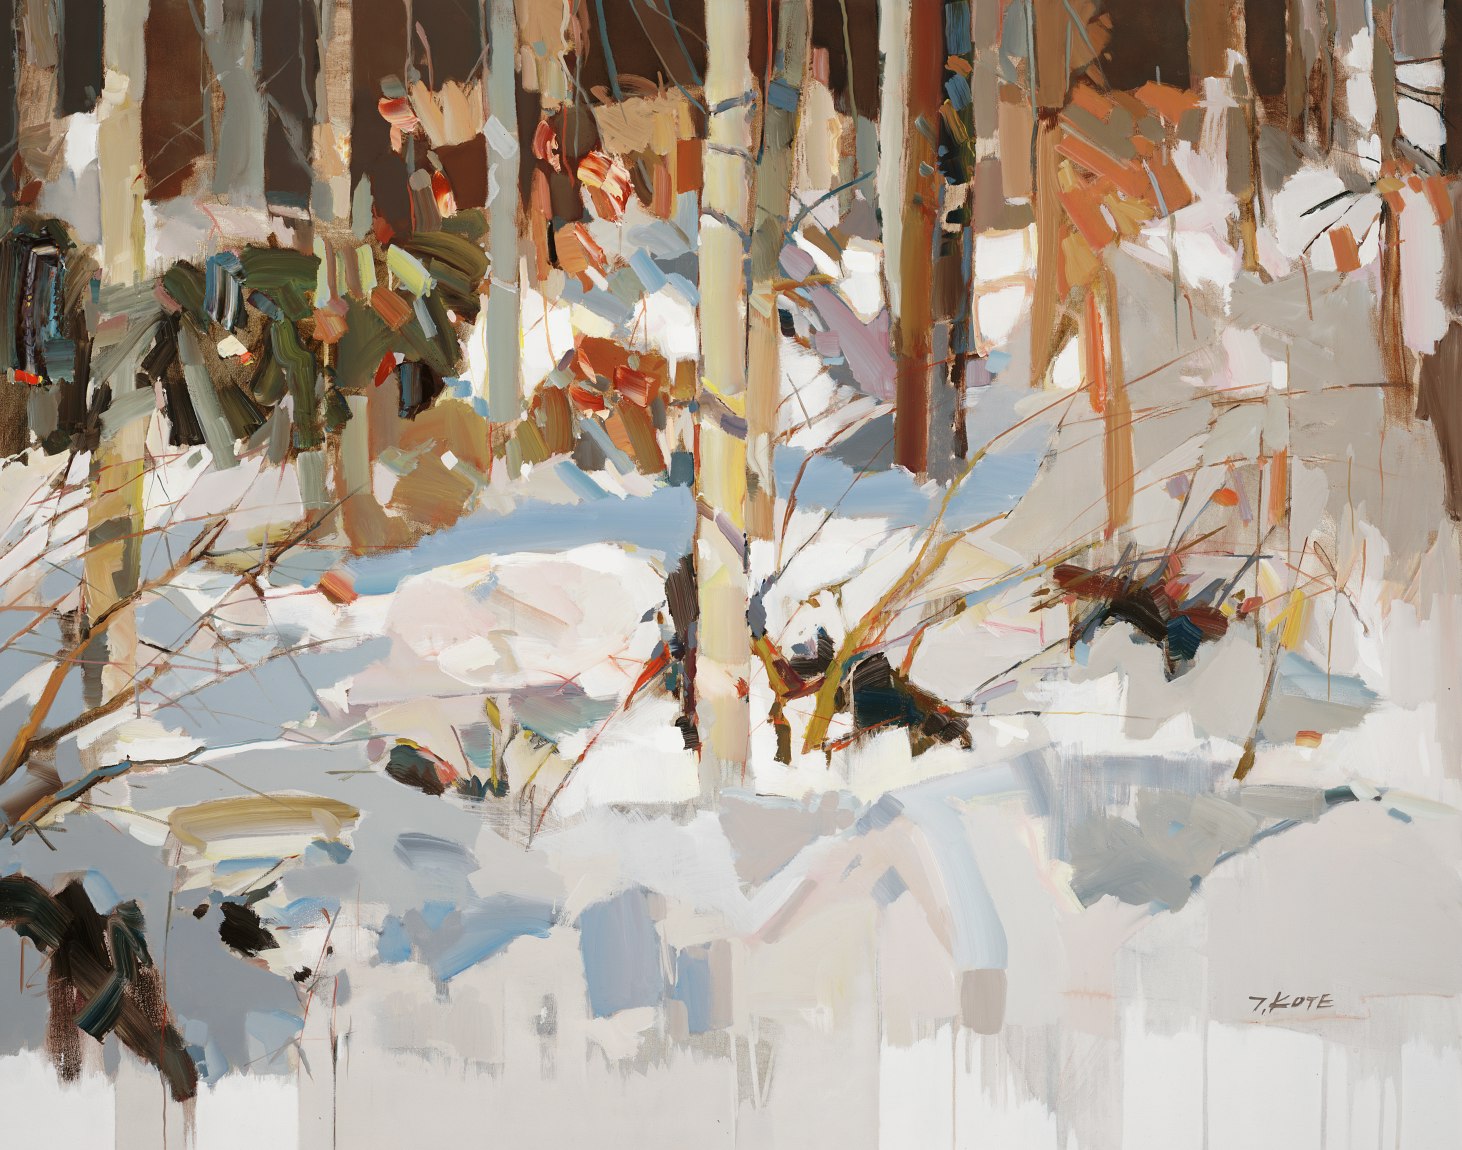 JOSEF KOTE - Caressed By The Wind - Acrylic on Canvas - 48x60 inches